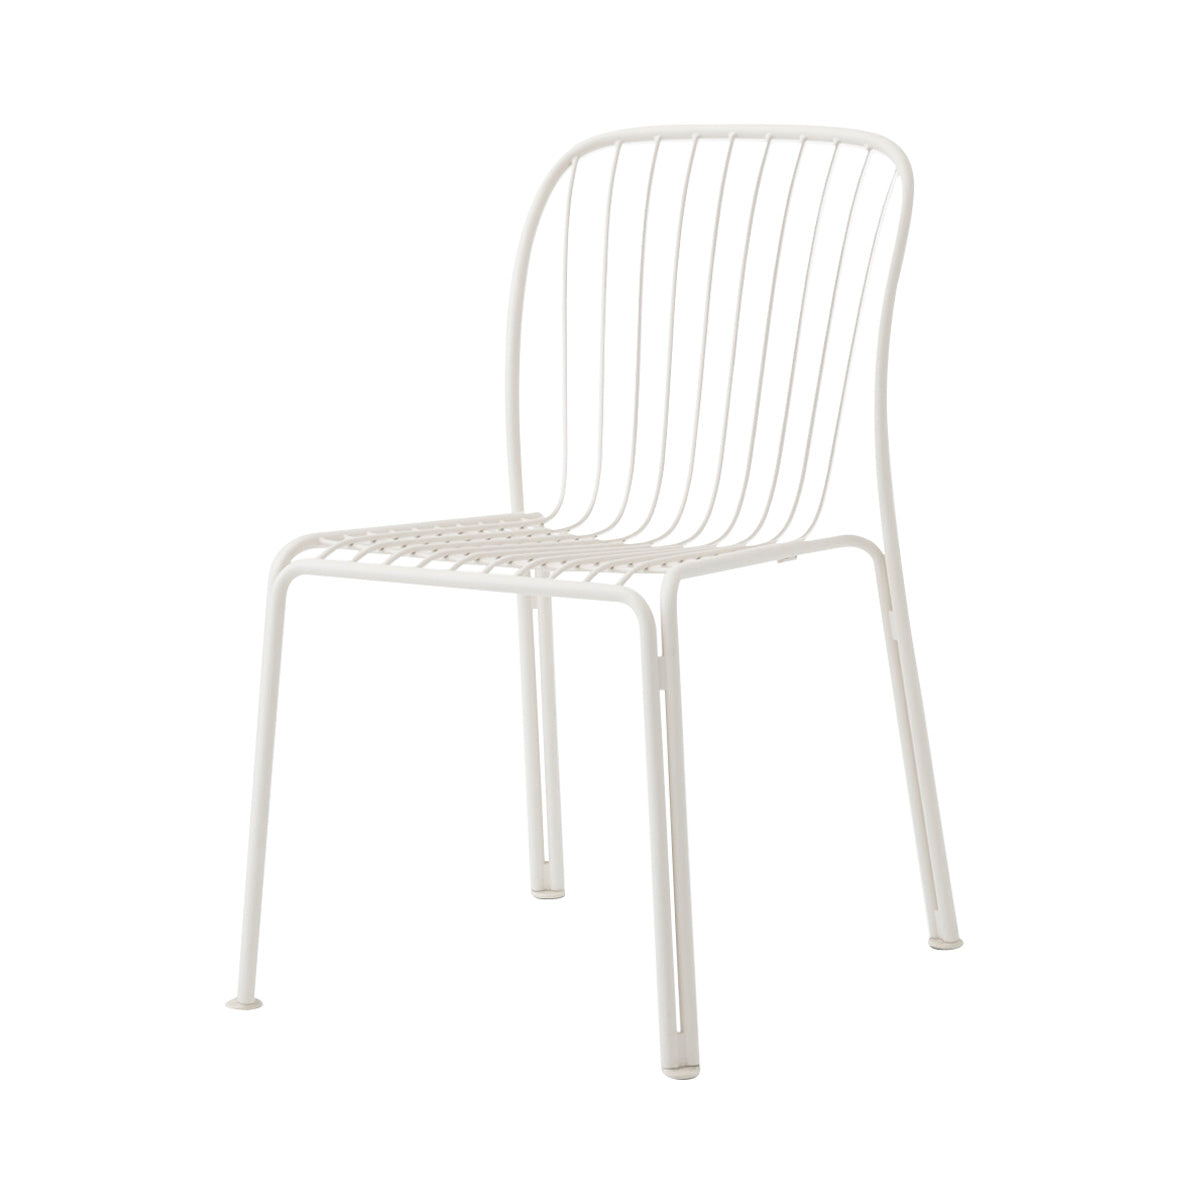 Thorvald SC94 Side Chair: Outdoor + Ivory + Without Cushion